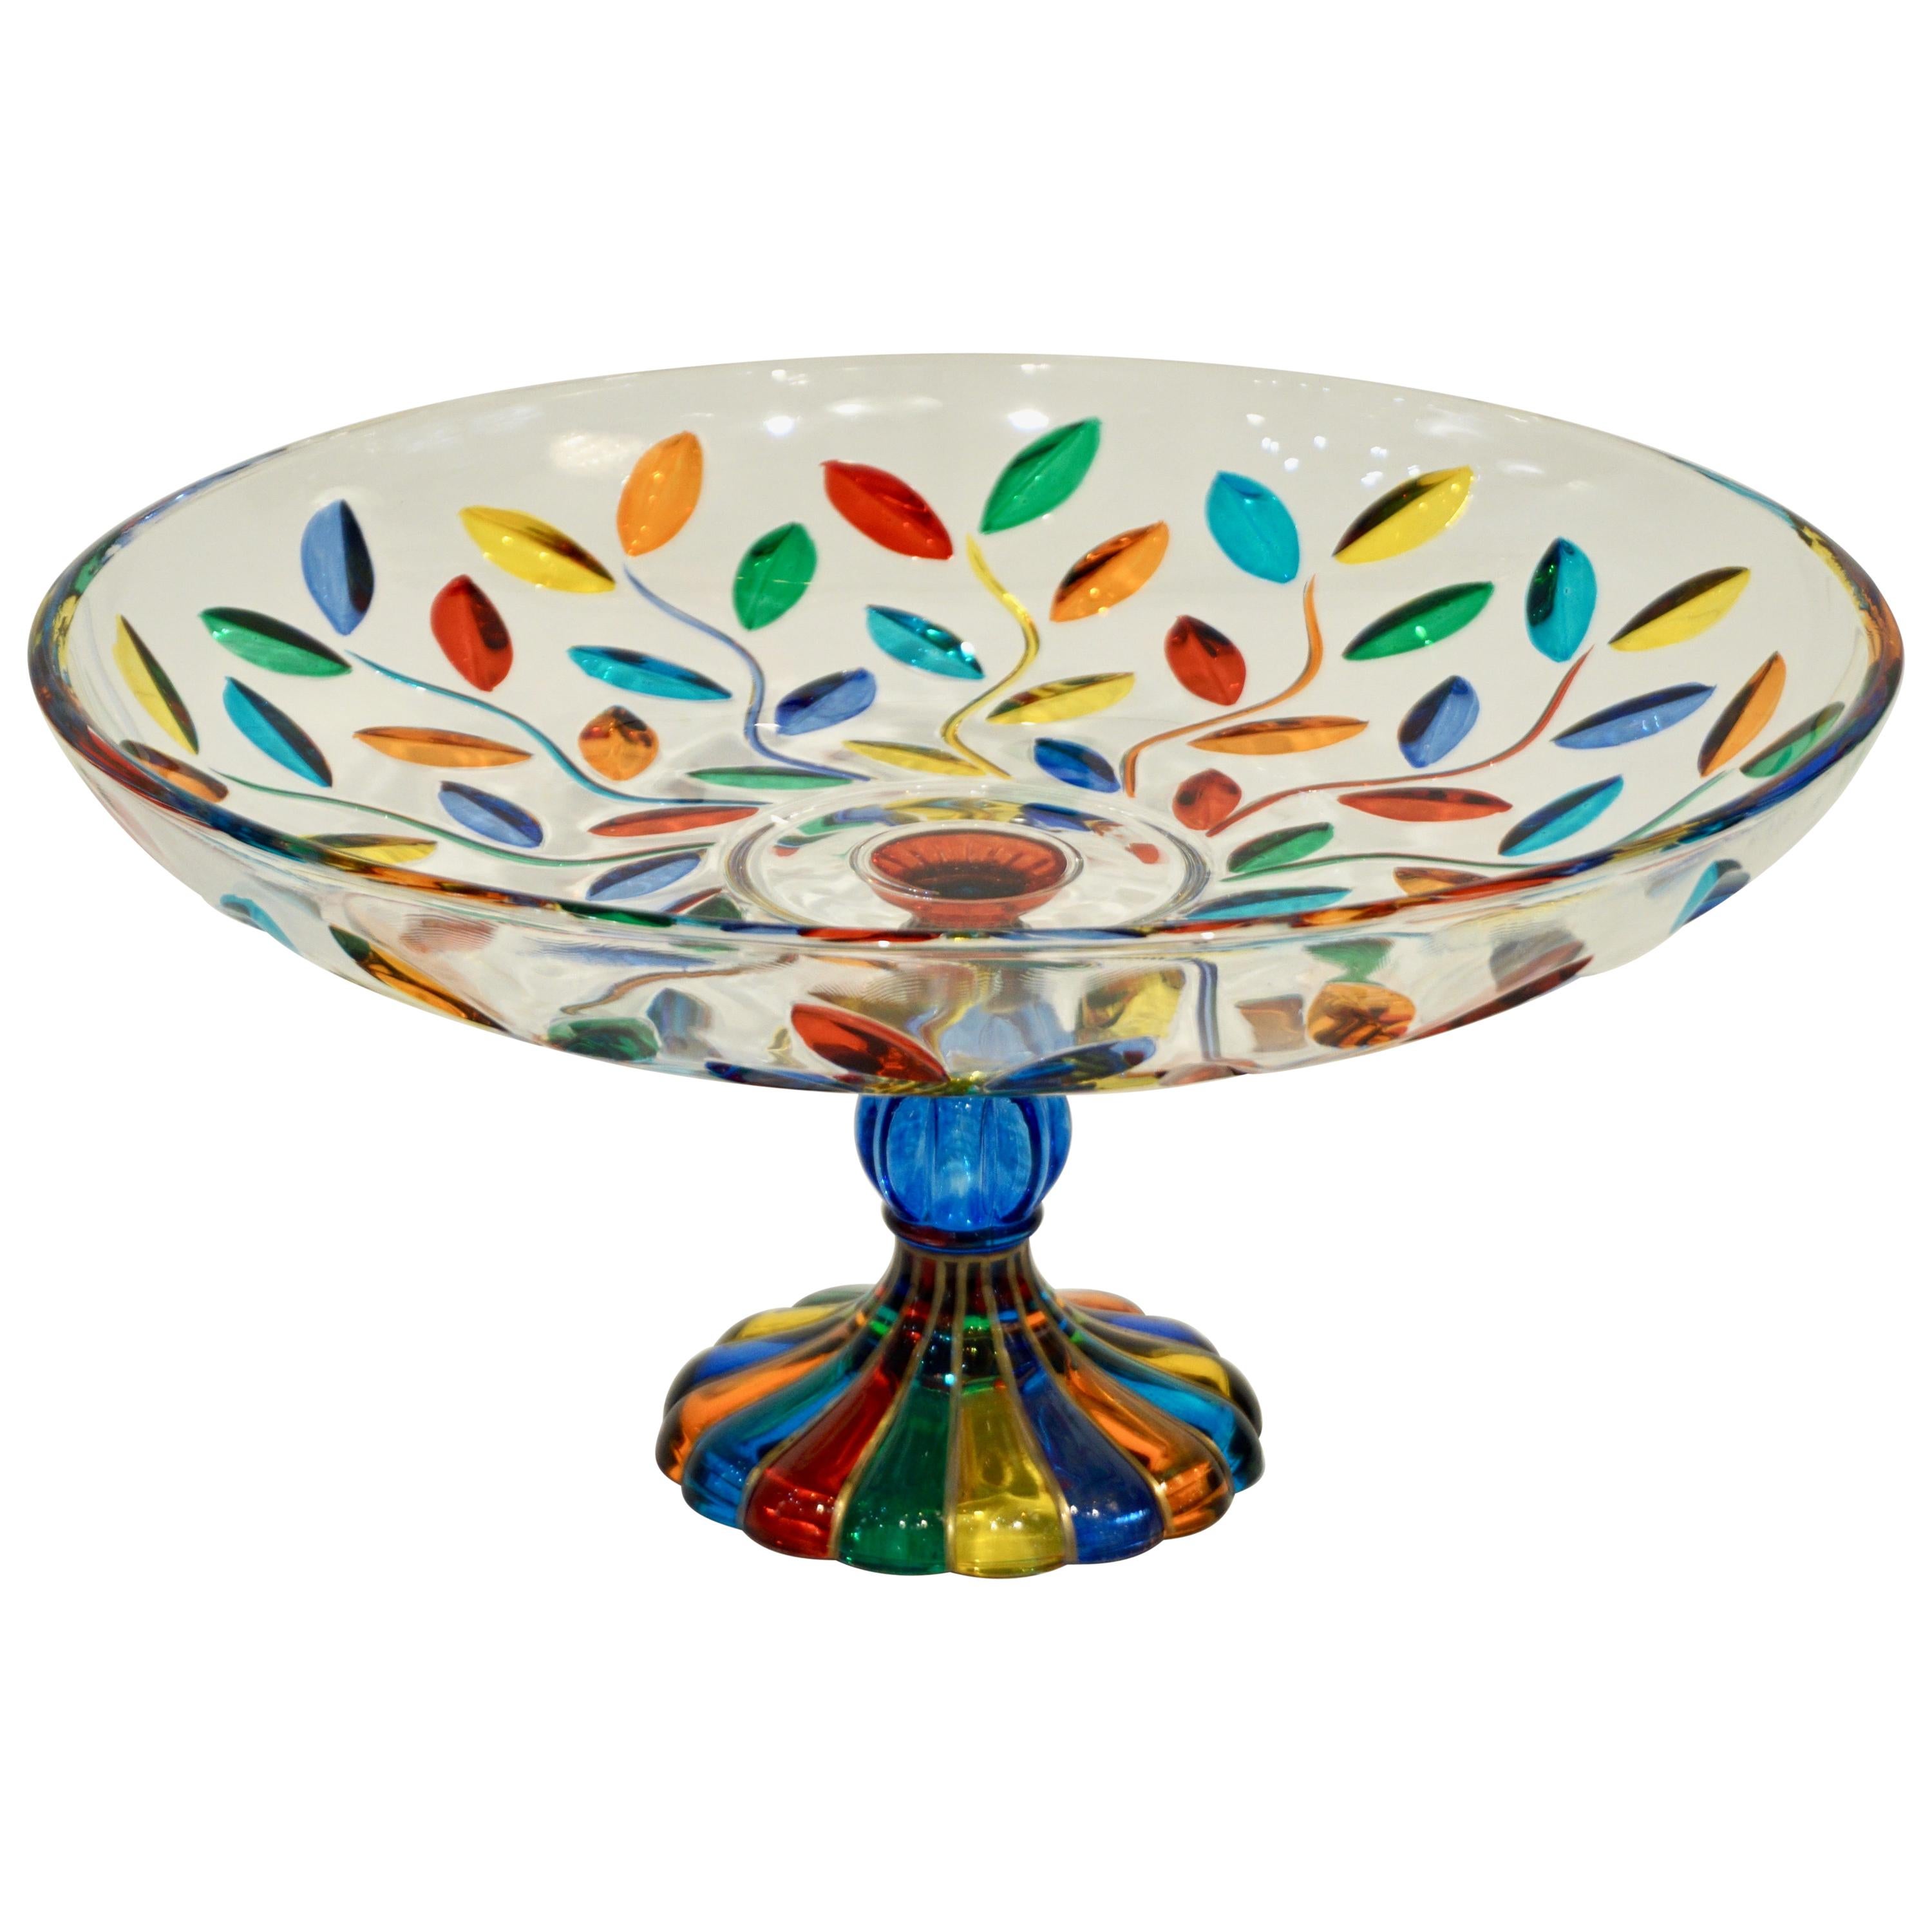 Colleoni Modern Crystal Murano Glass Compote Dish / Tazza with Colorful Leaves